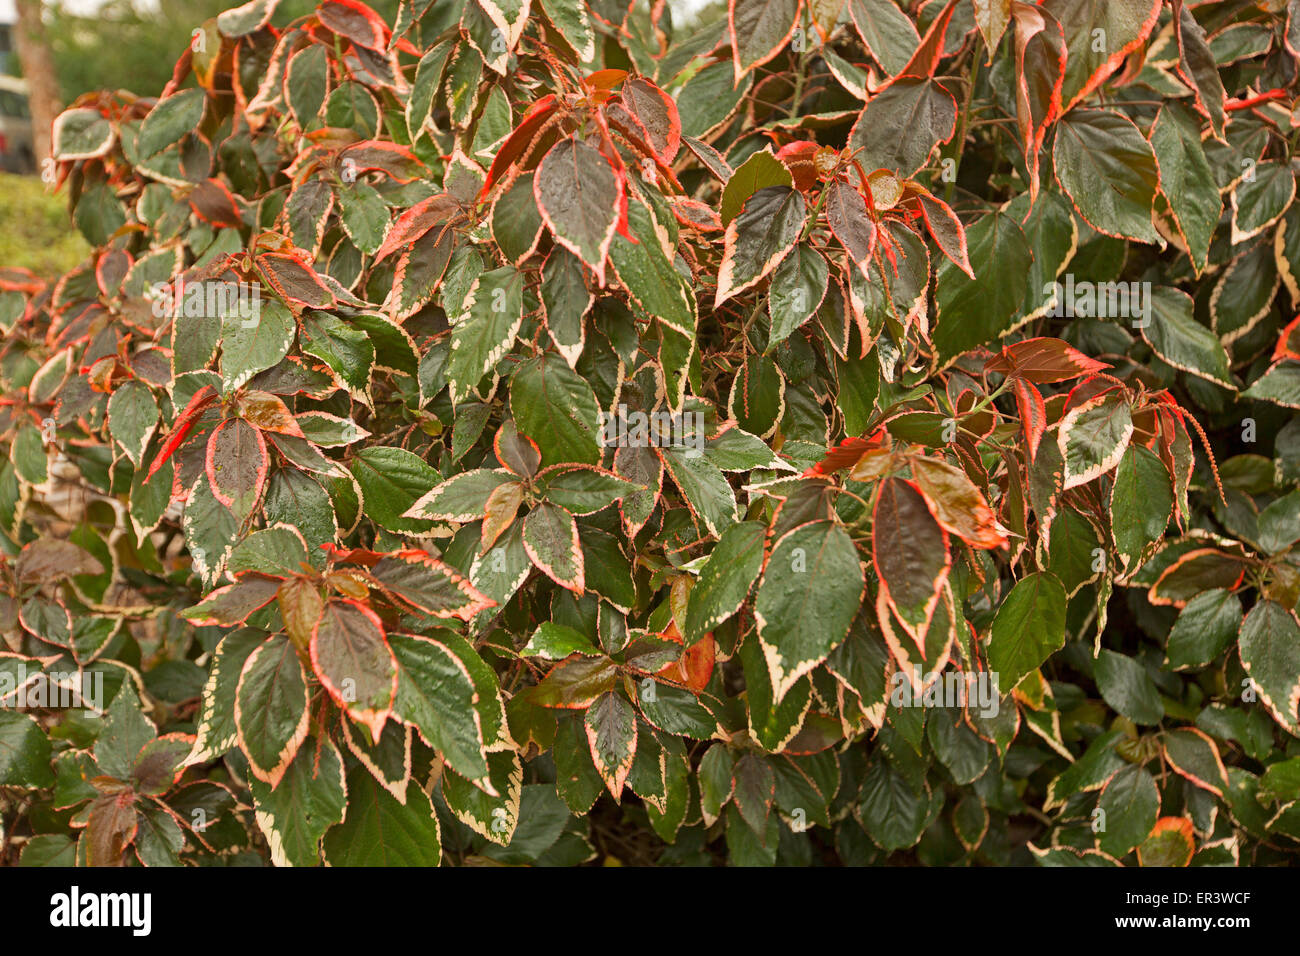 Mass of red, green, and cream  variegated leaves of Acalypha wilkesiana cultivar, Chenille plant, an evergreen shrub Stock Photo